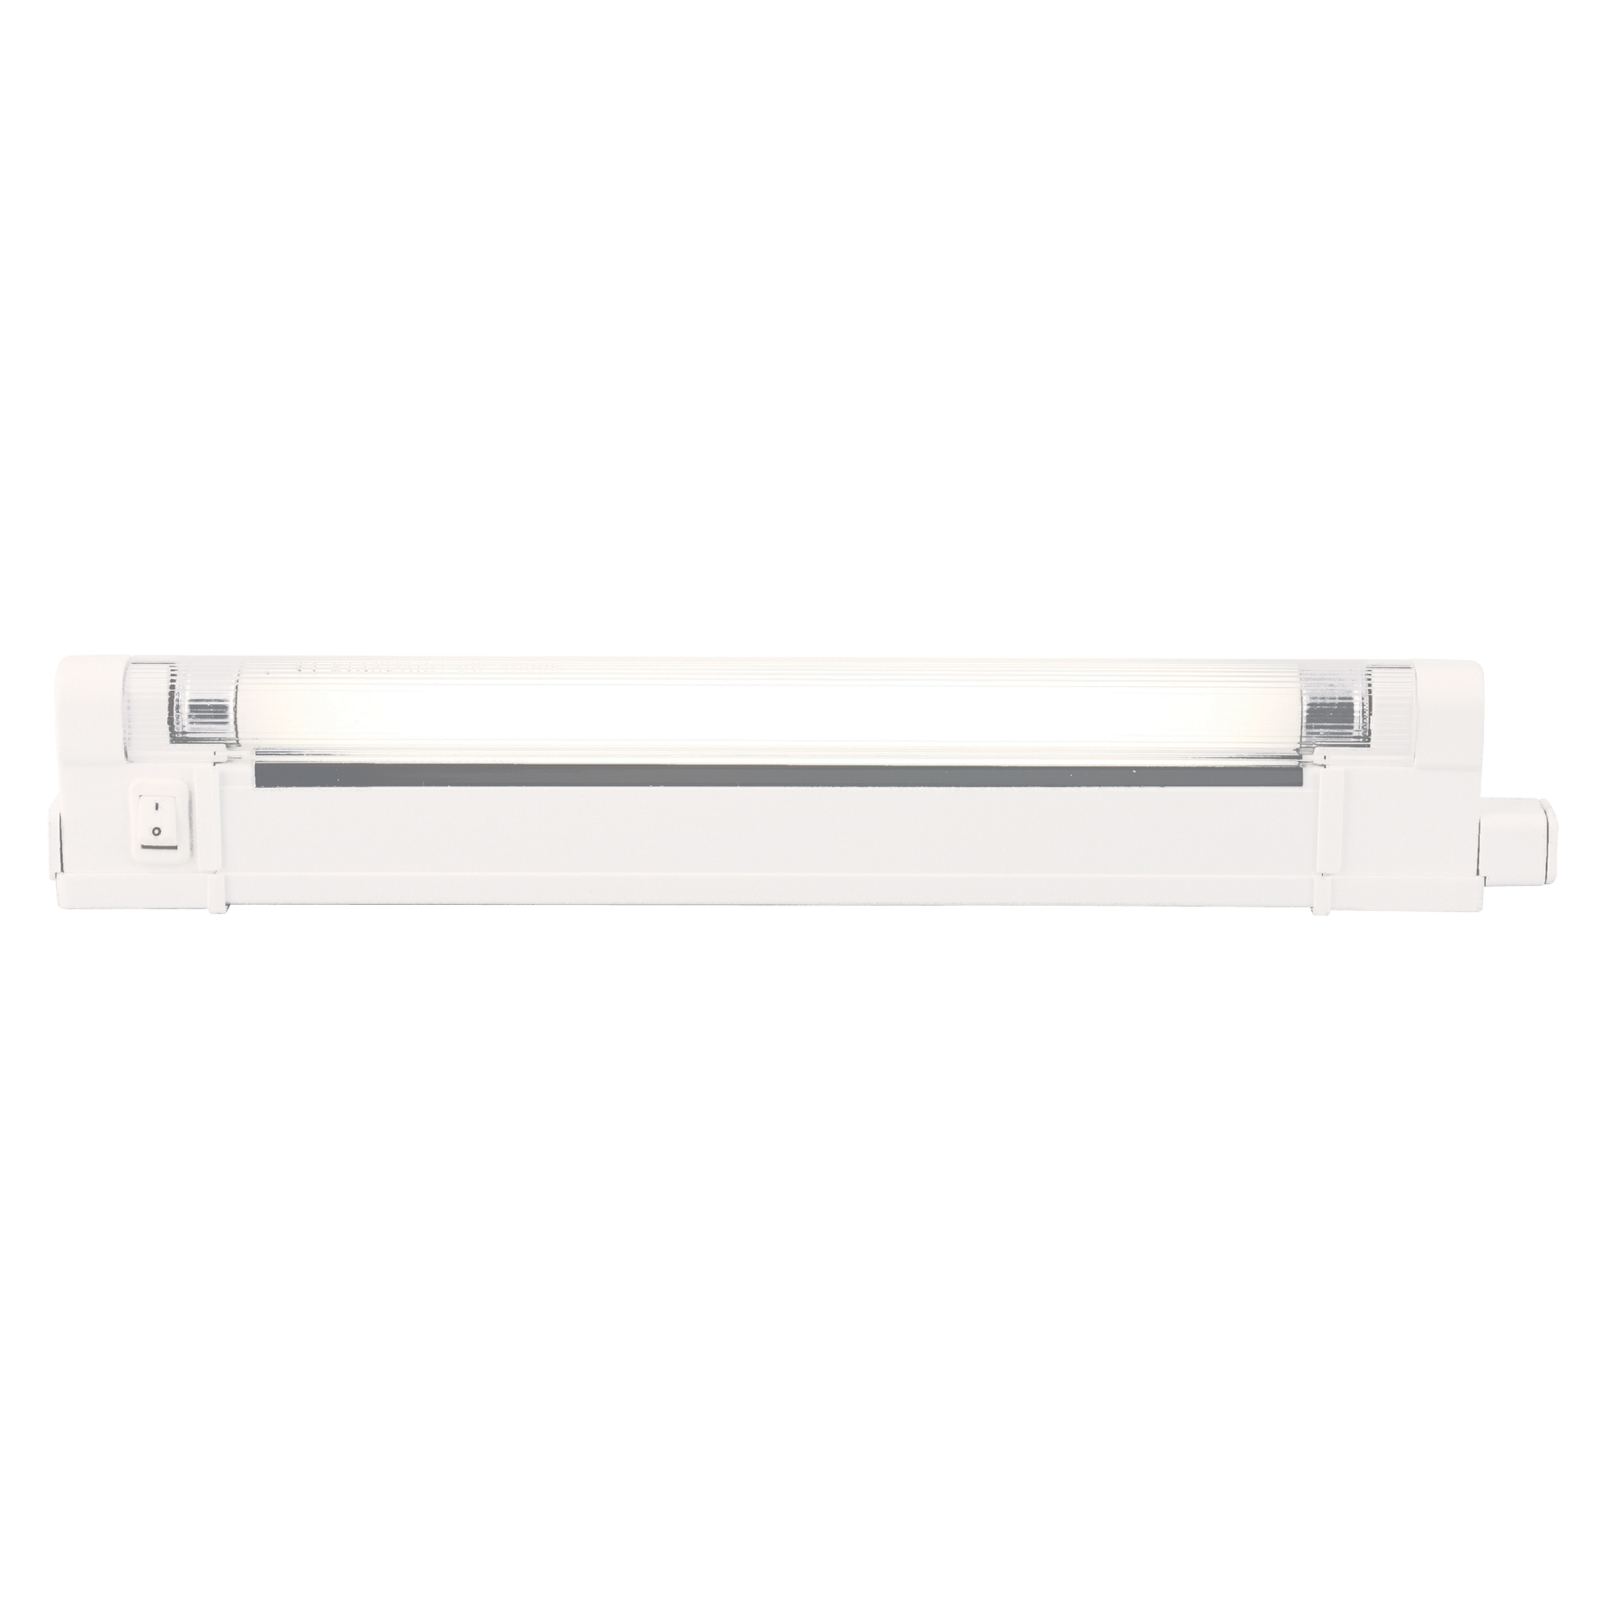 IP20 10W T4 Fluorescent Fitting With Tube, Switch And Diffuser 4000K - T410 